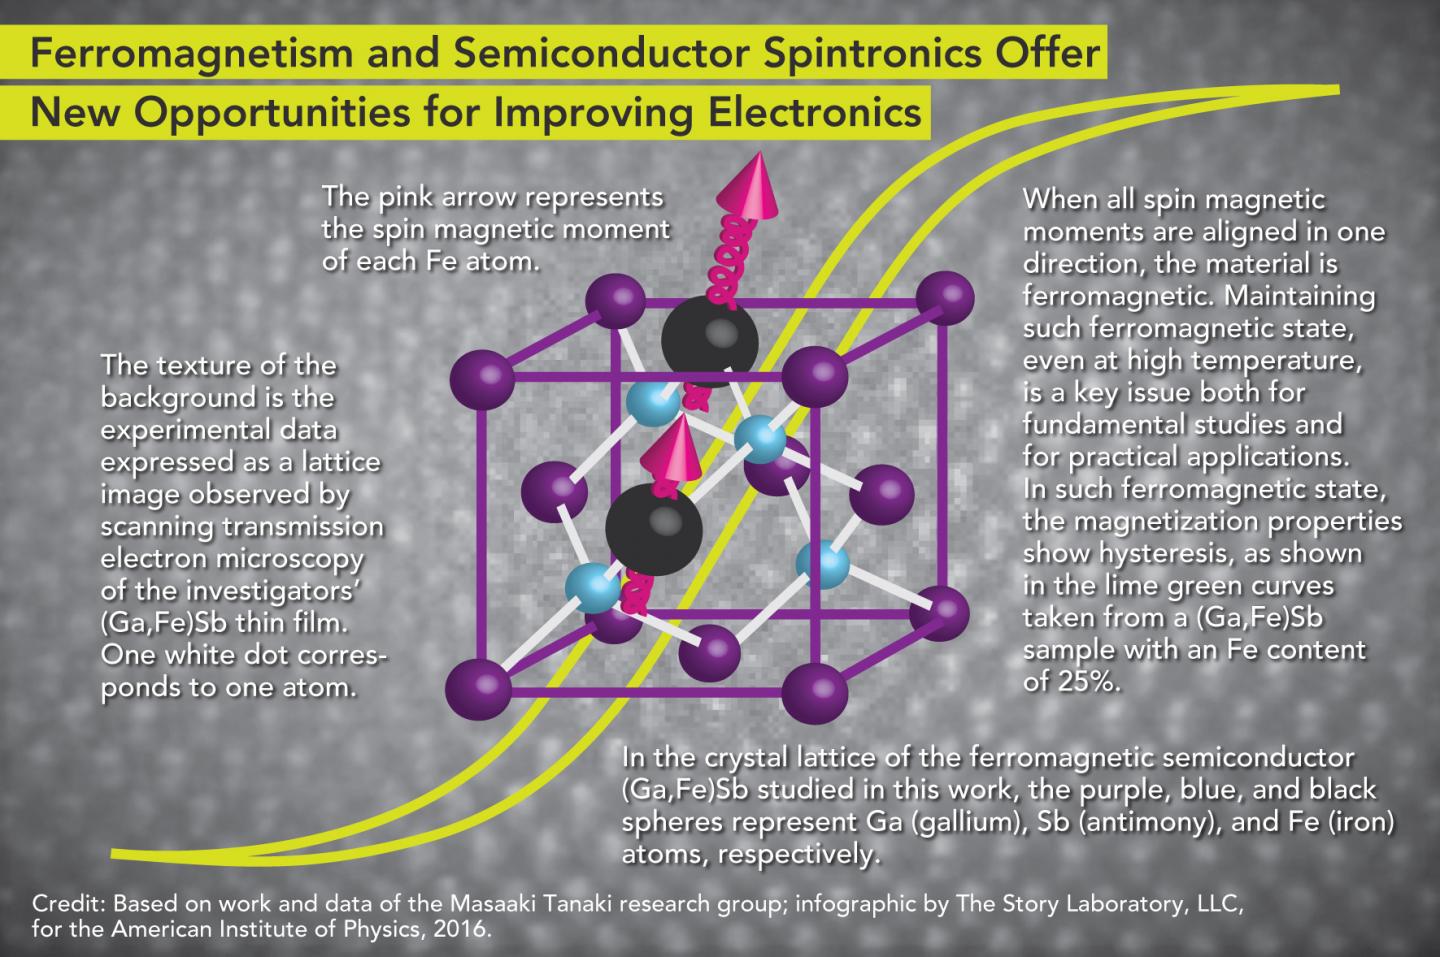 Ferromagnetism and Semiconductor Spintronics